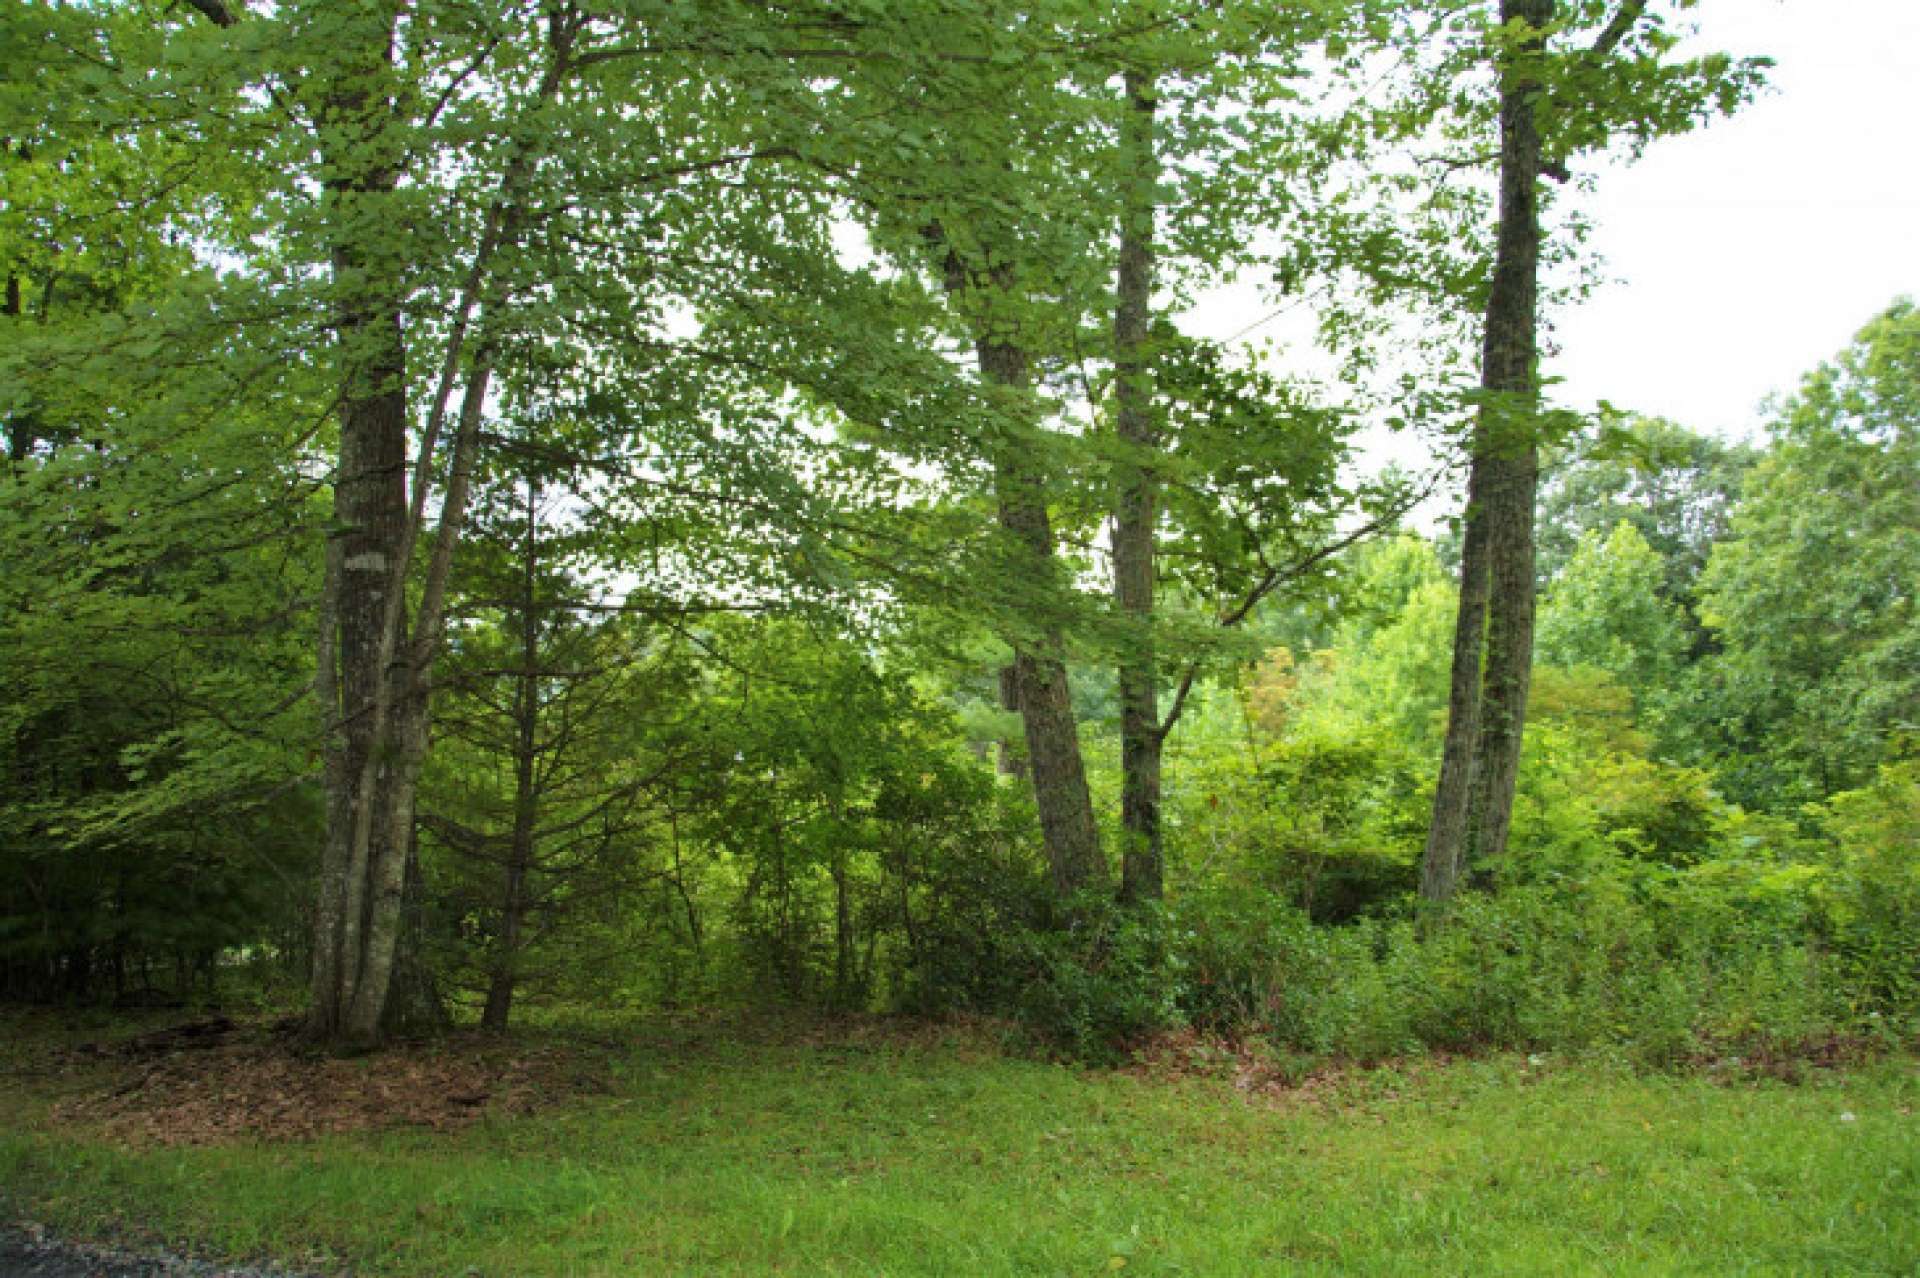 Serene and tranquil, this home site and community offer the best of mountain living while still being a short drive into Boone or West Jefferson, NC for shopping, recreation and adventure.  <b>Lots 23 and 24 are offered together for $44,900.<font color = red>  * Also offered separately at $24,500 Each. M282  </font color></b>